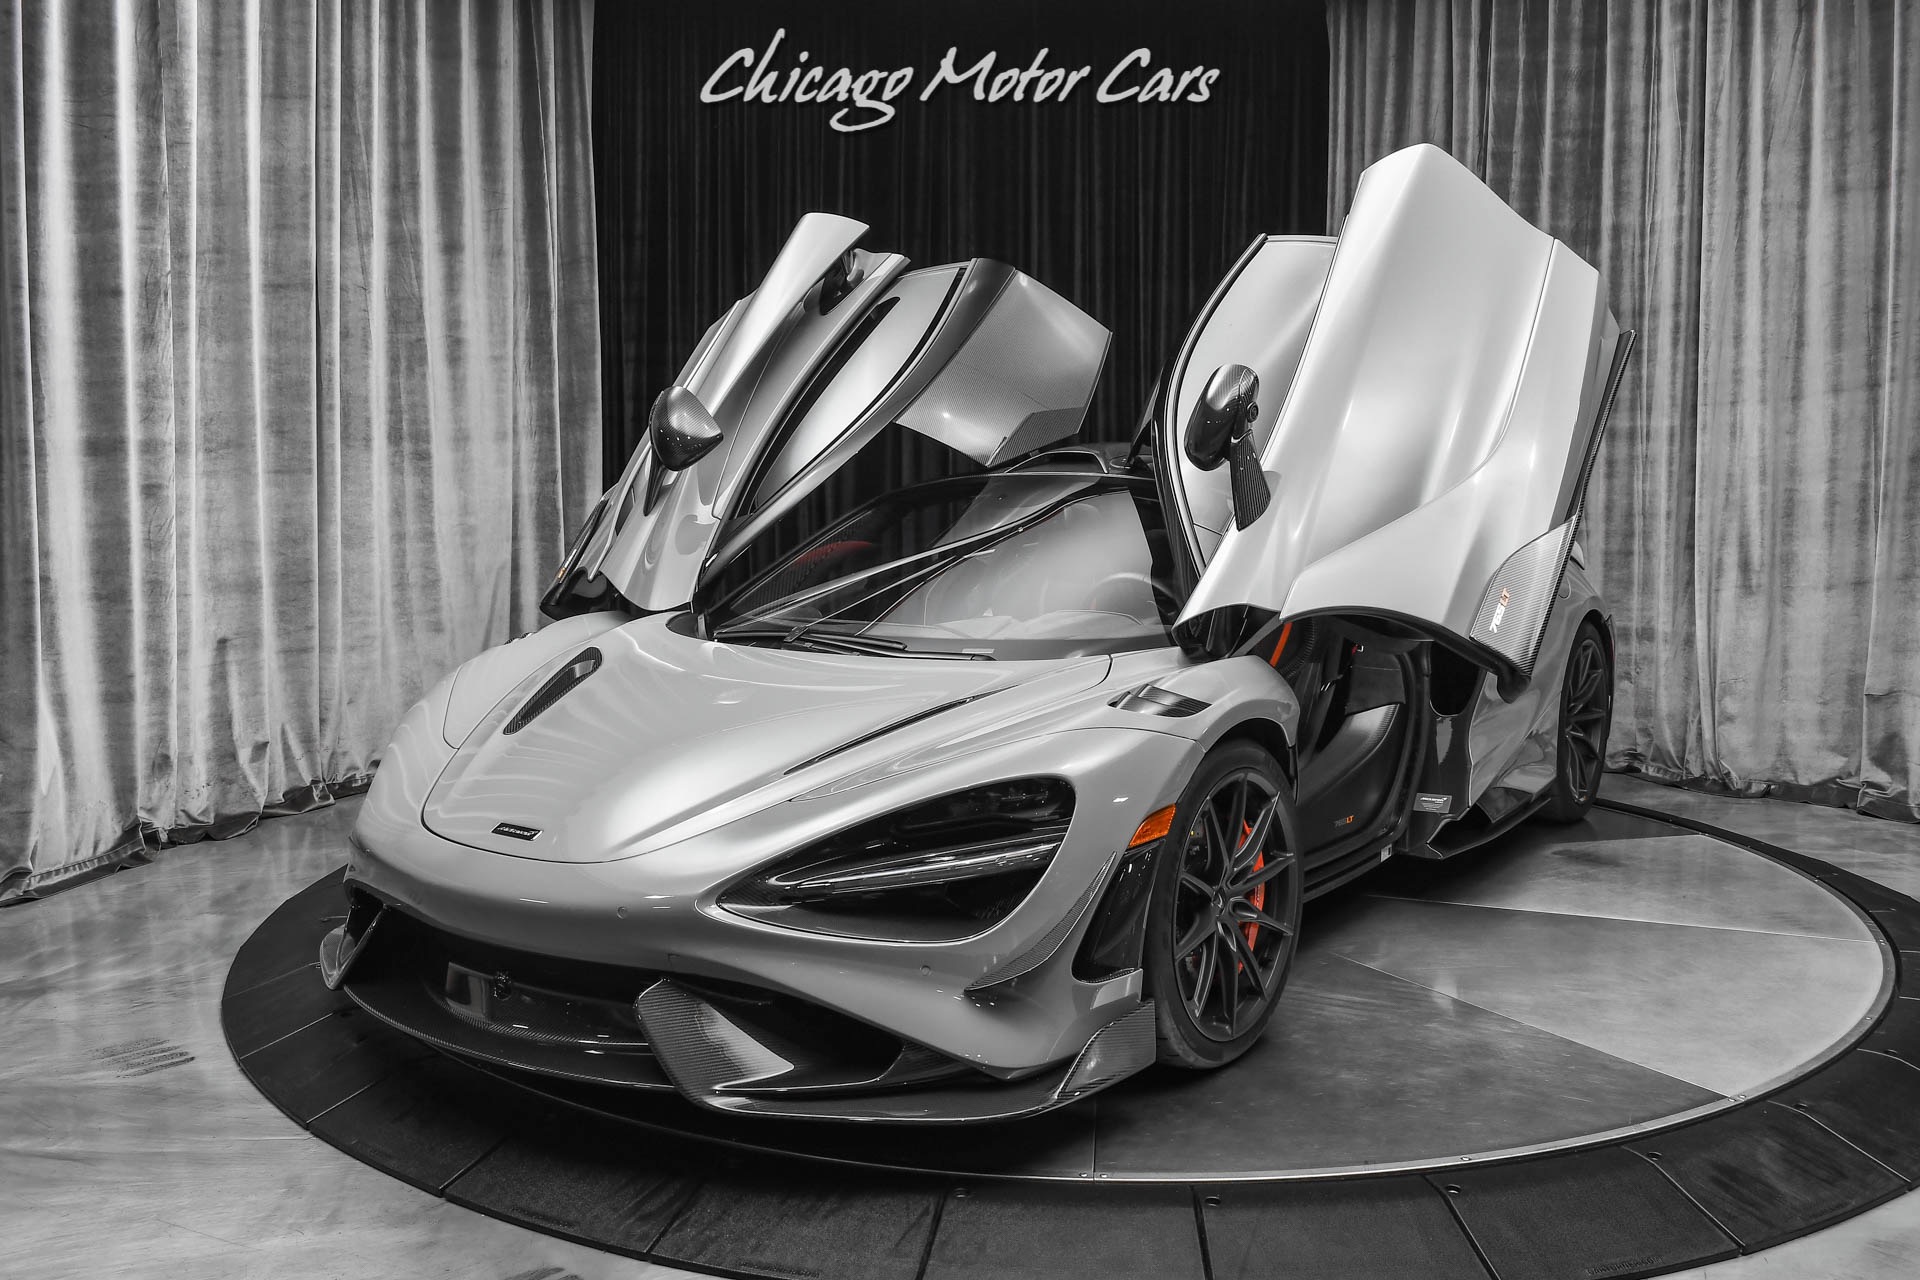 Used 2021 Mclaren 765LT Coupe LOADED! MSO NARDO PAINT